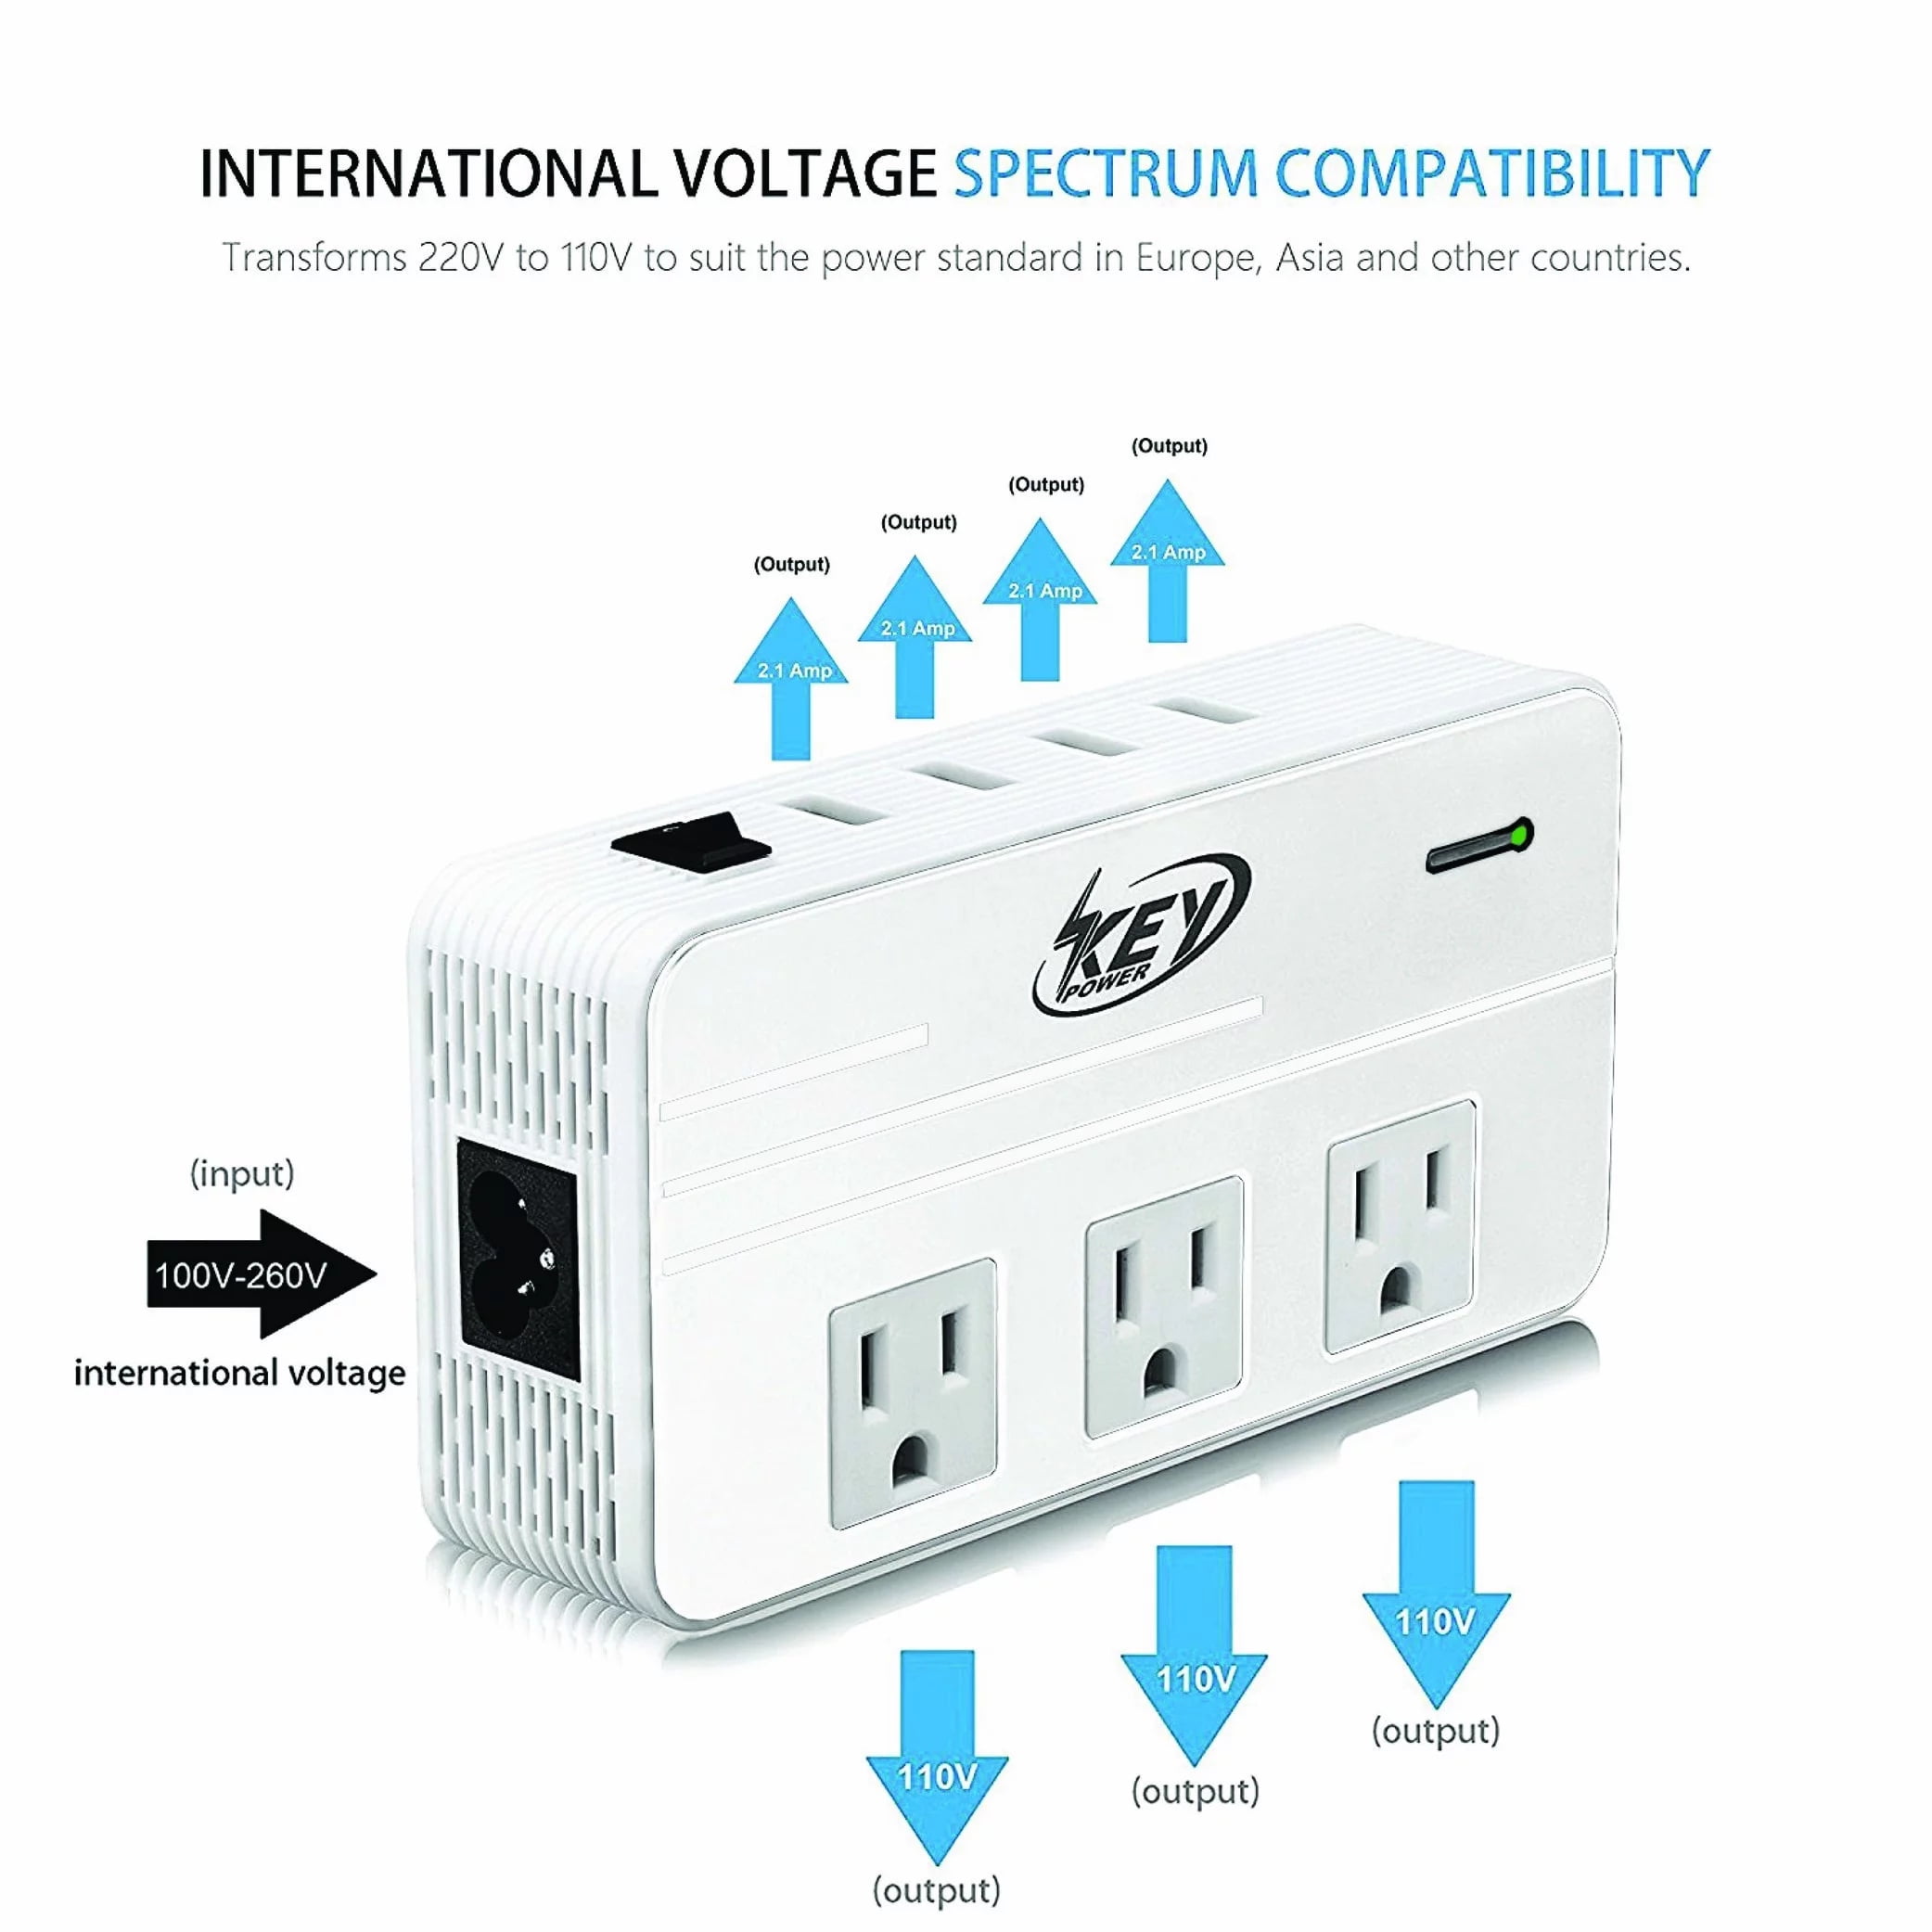 Key Power 230-Watt Step Down 220V to 110V Voltage Converter, Power  Converter and International Travel Adapter with Type C 18W for USA  Appliance Overseas in Europe, Ireland, AU, UK, China, India, etc. 